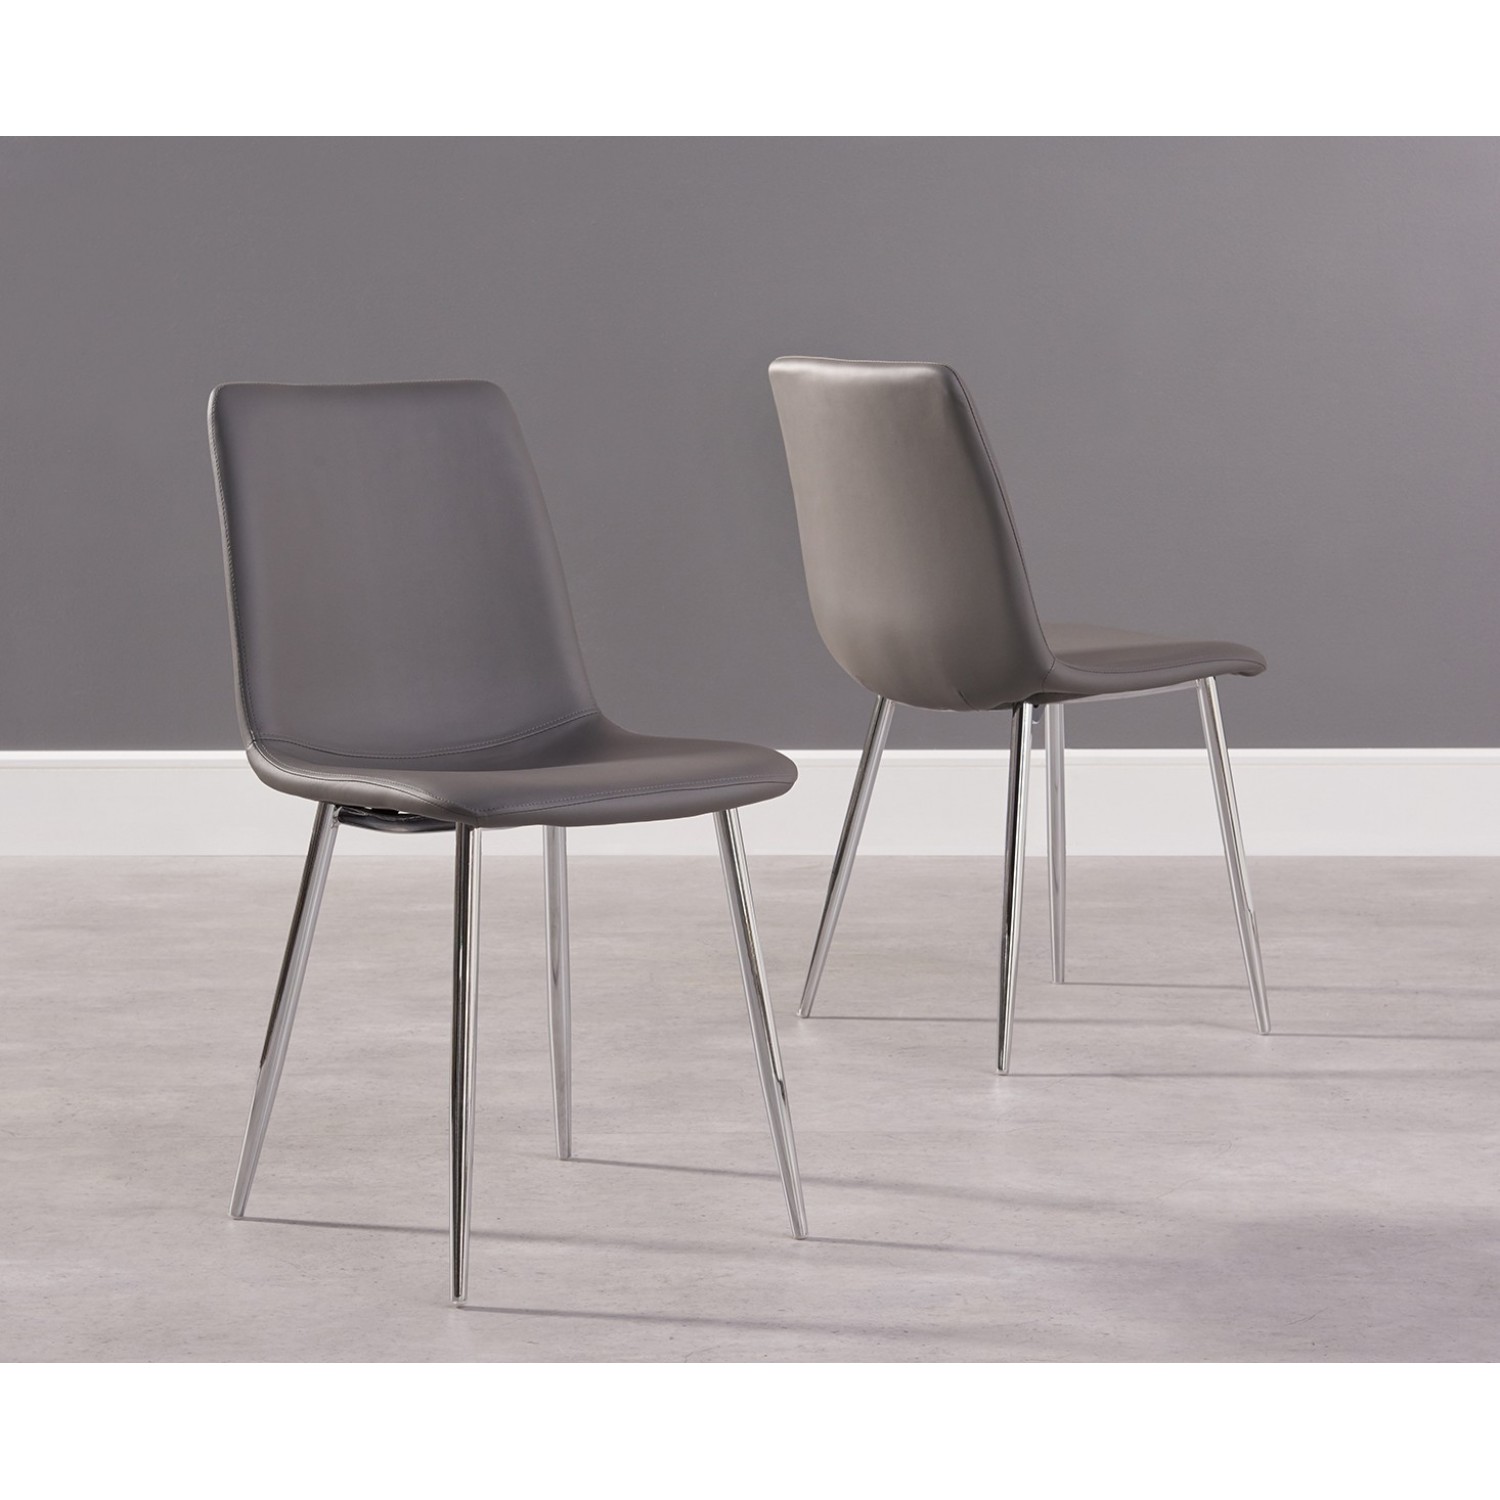 Hatfield Grey Faux Leather And Chrome, Leather Chrome Dining Chairs Uk